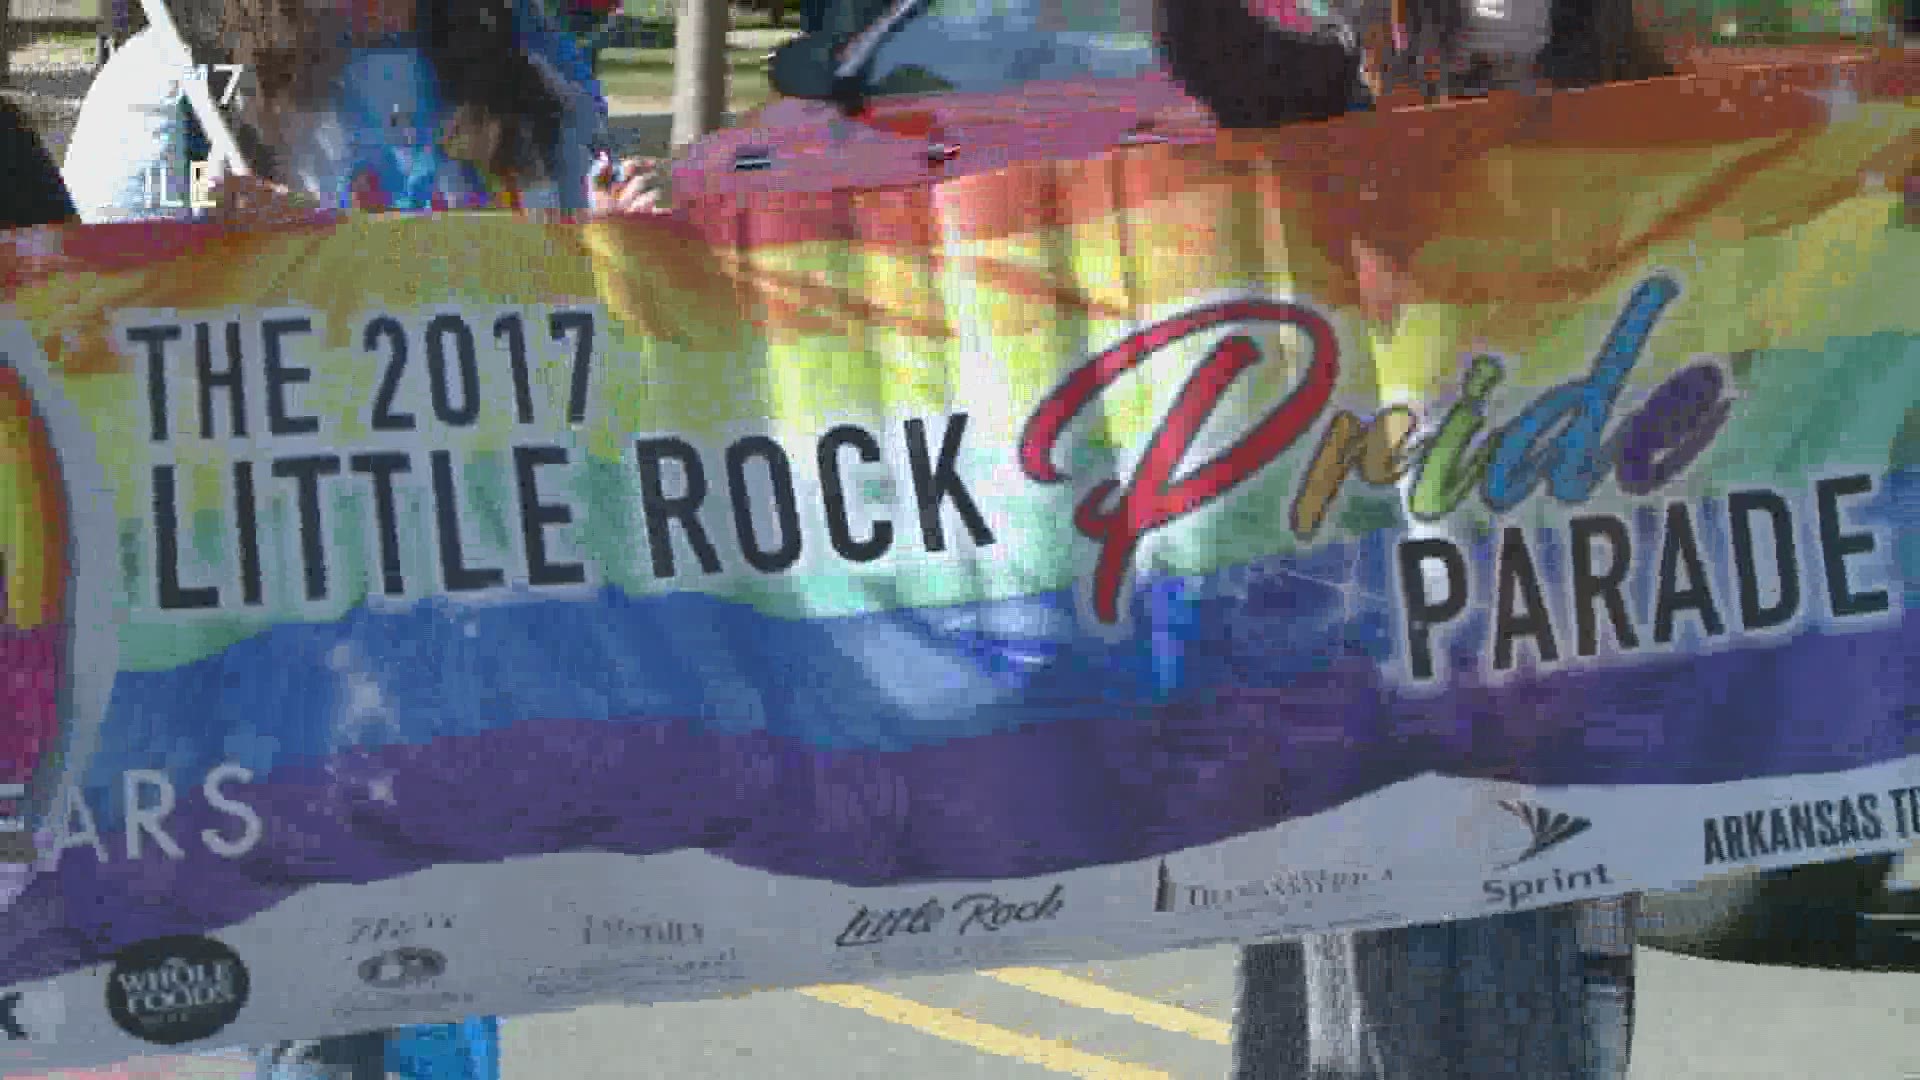 Because of the pandemic, organizers of Central Arkansas Pride have been working for months to make this event happen.